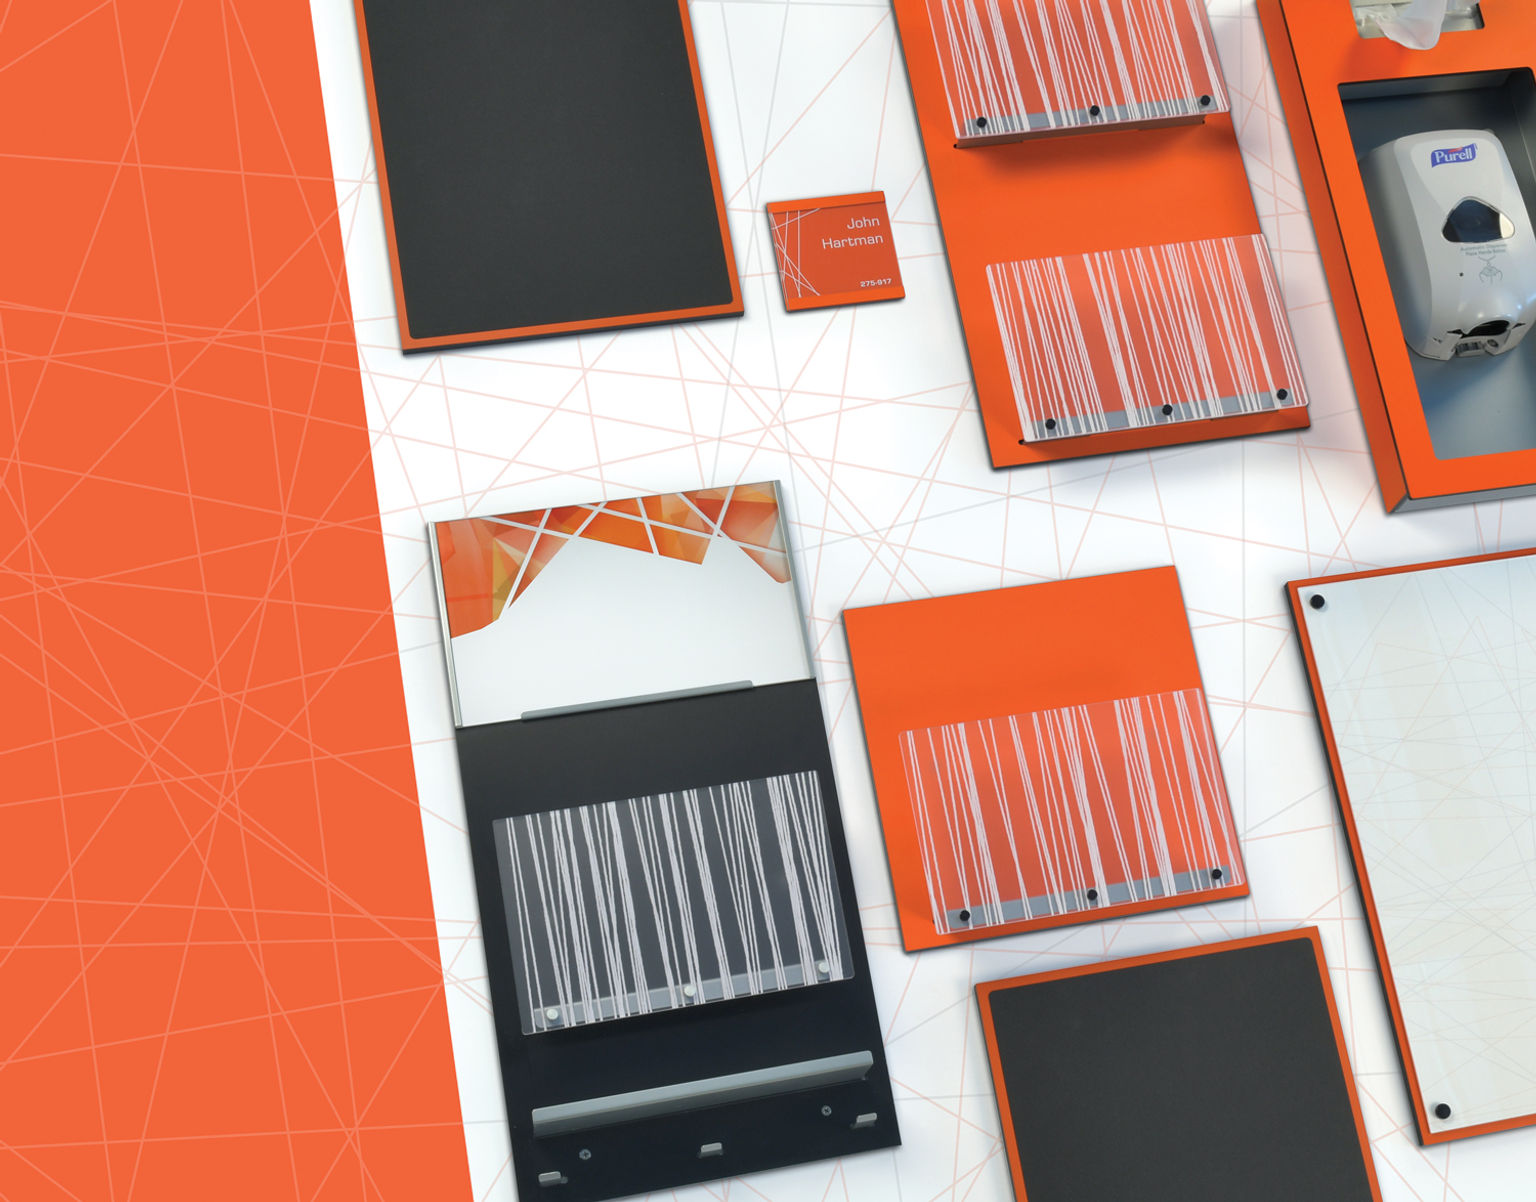 A wall accessory system design with a diagonal geometric pattern and bold orange finishes. Elements include wall organizers, message boards, sanitizer stations, and workstation nameplate